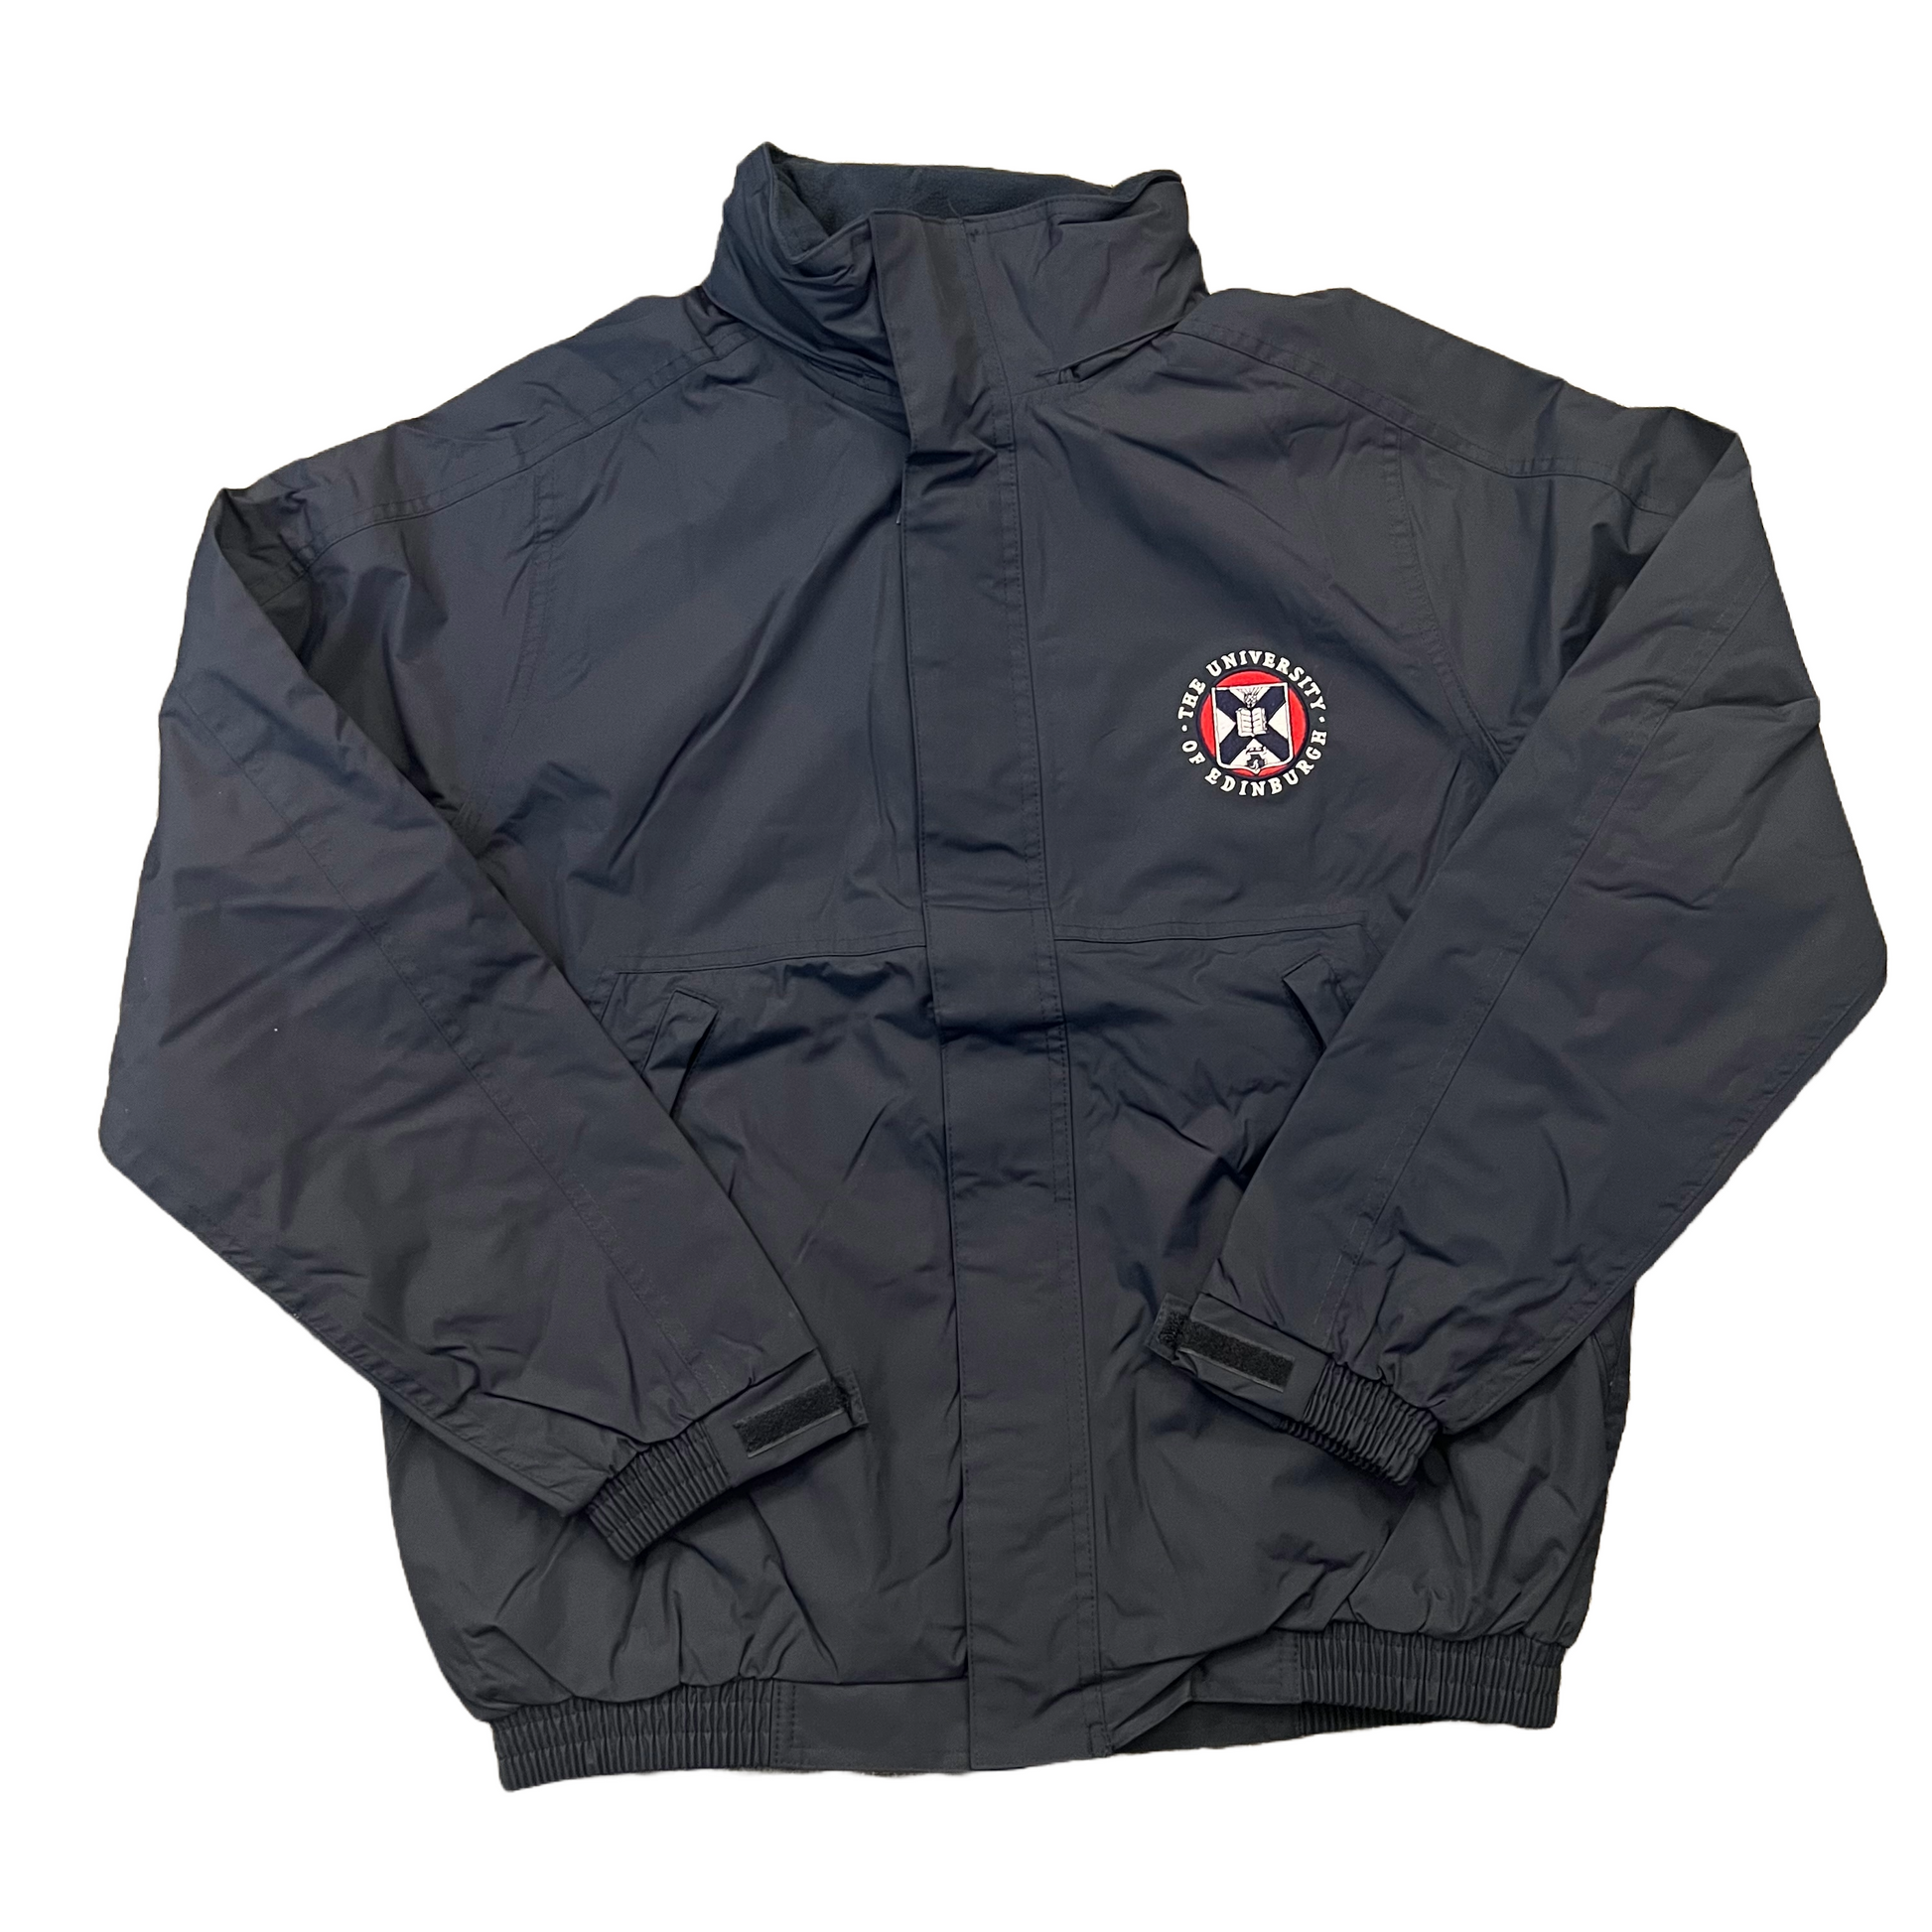 navy waterproof jacket with the University crest embroidered on the left chest in white, red and navy 